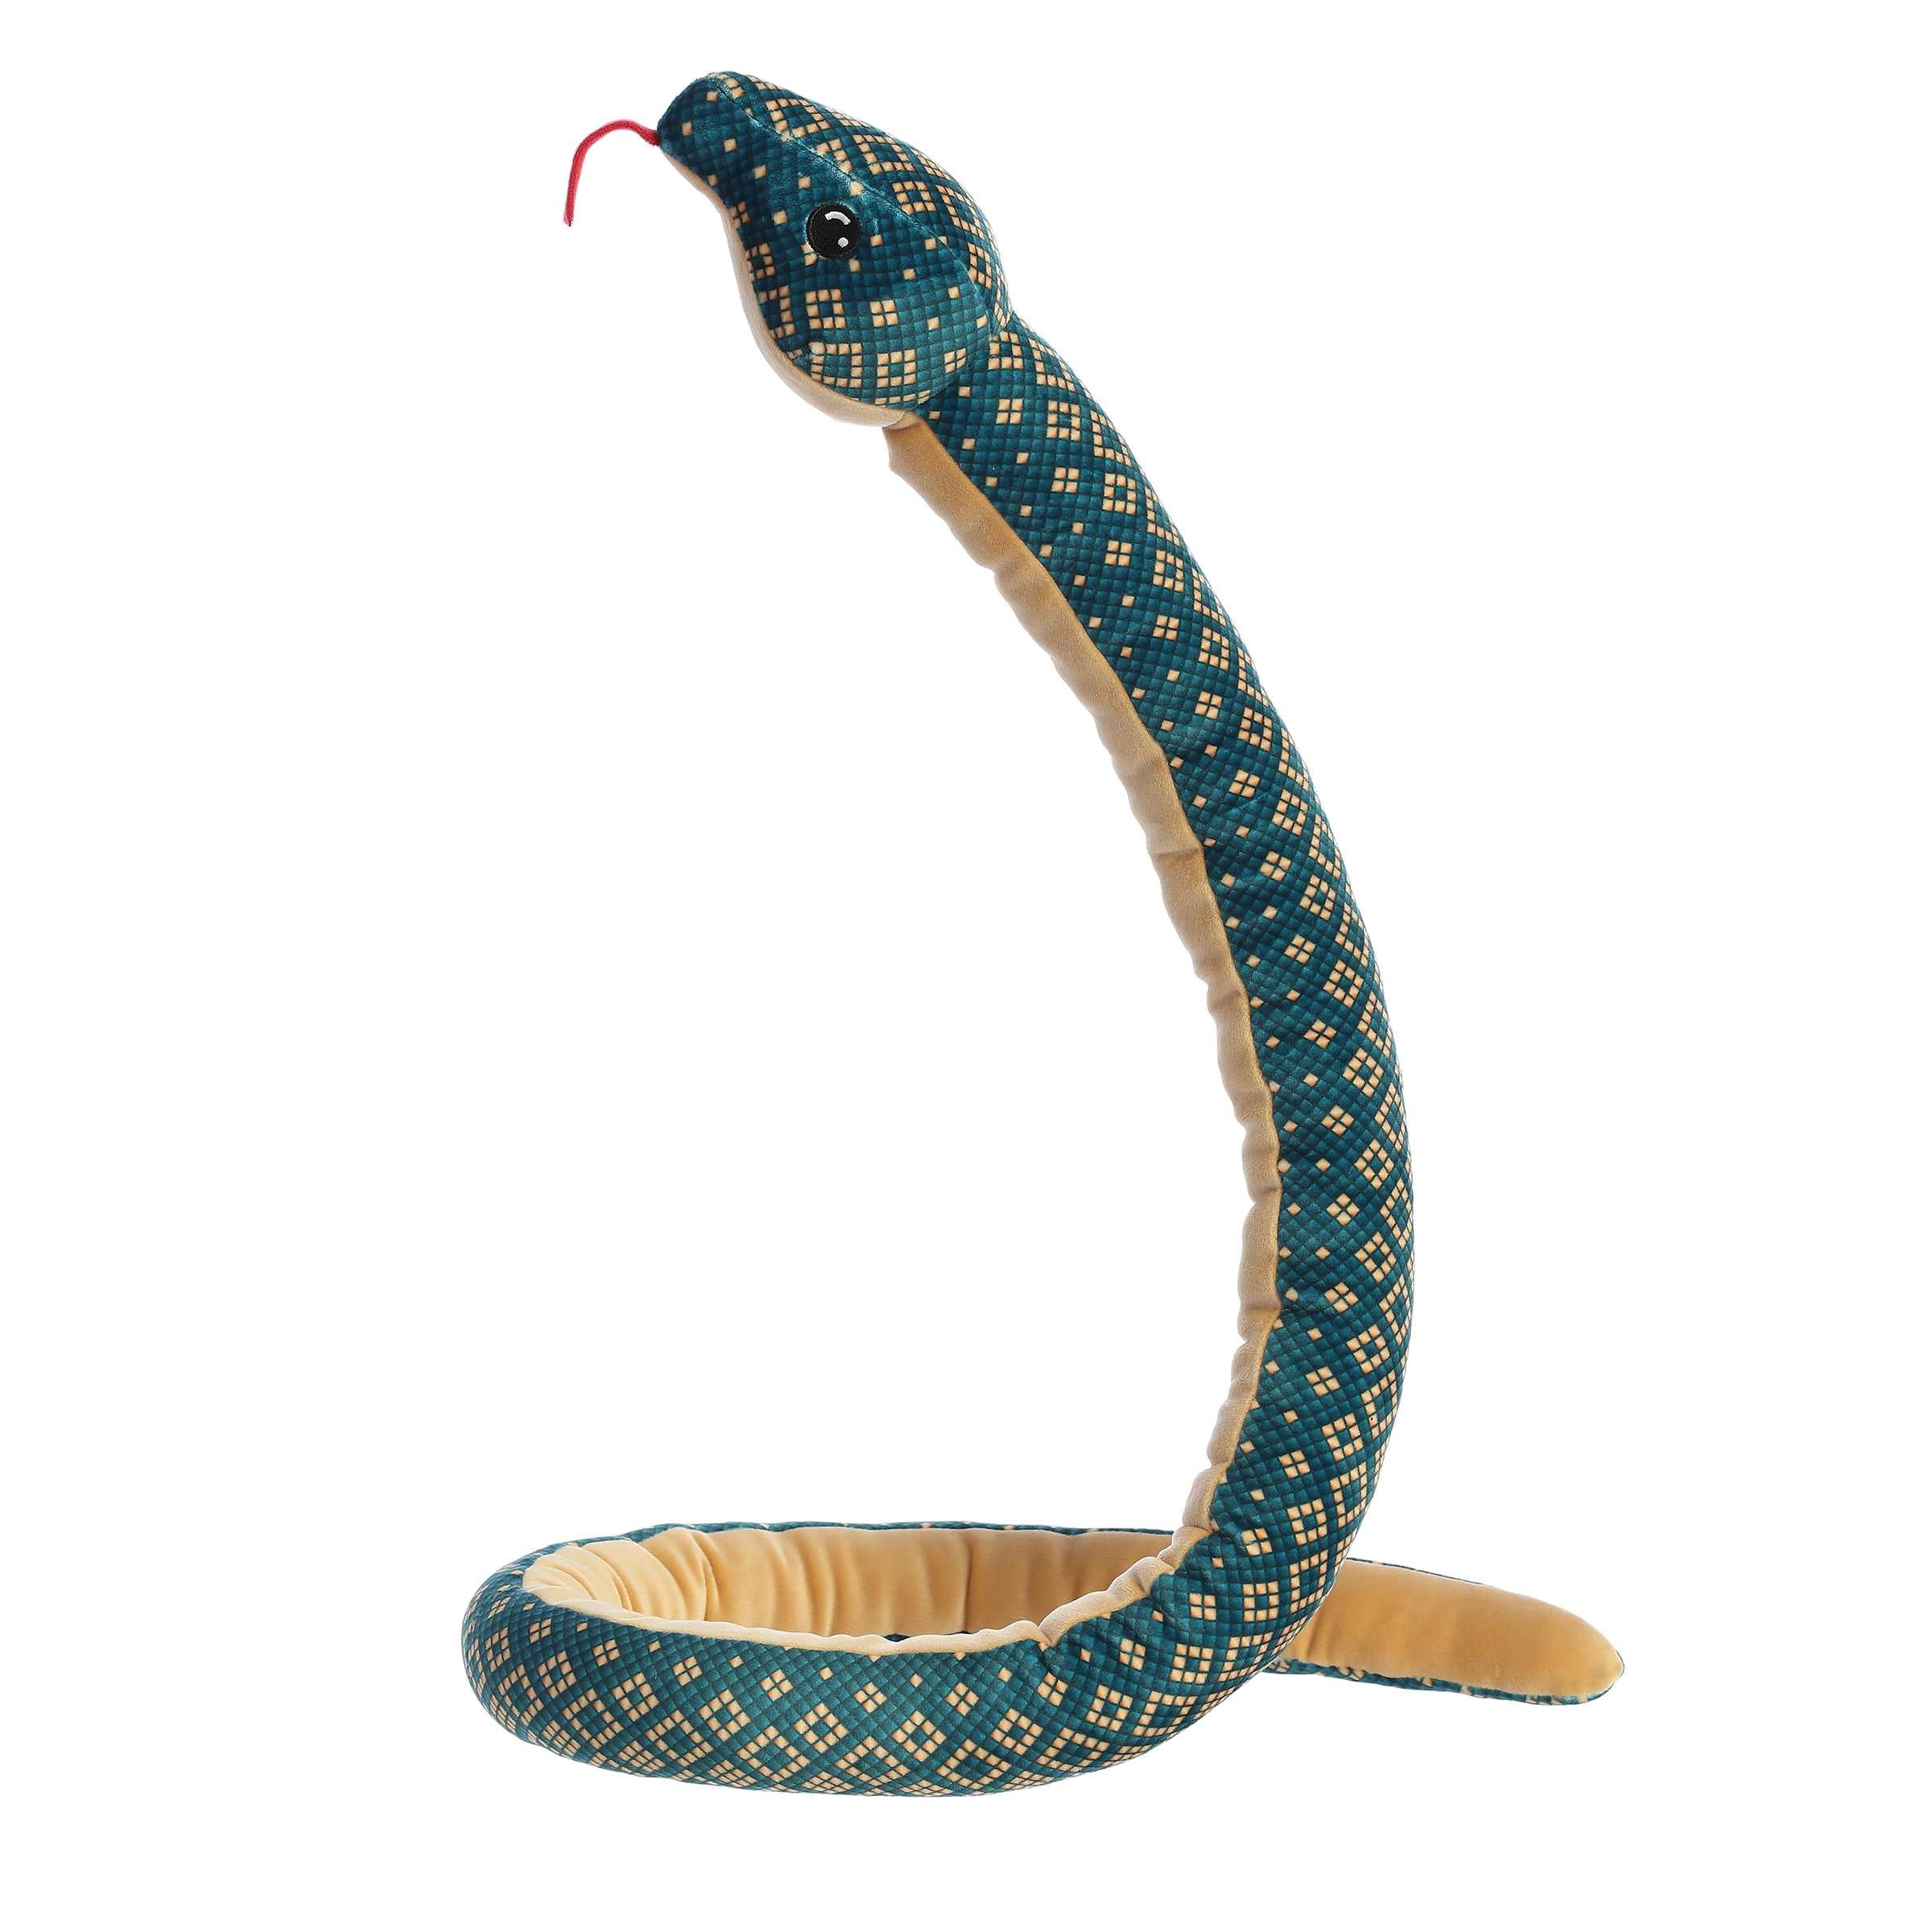 Black and copper diamond-patterned snake plush, super squishy and inviting for imaginative play and collection.